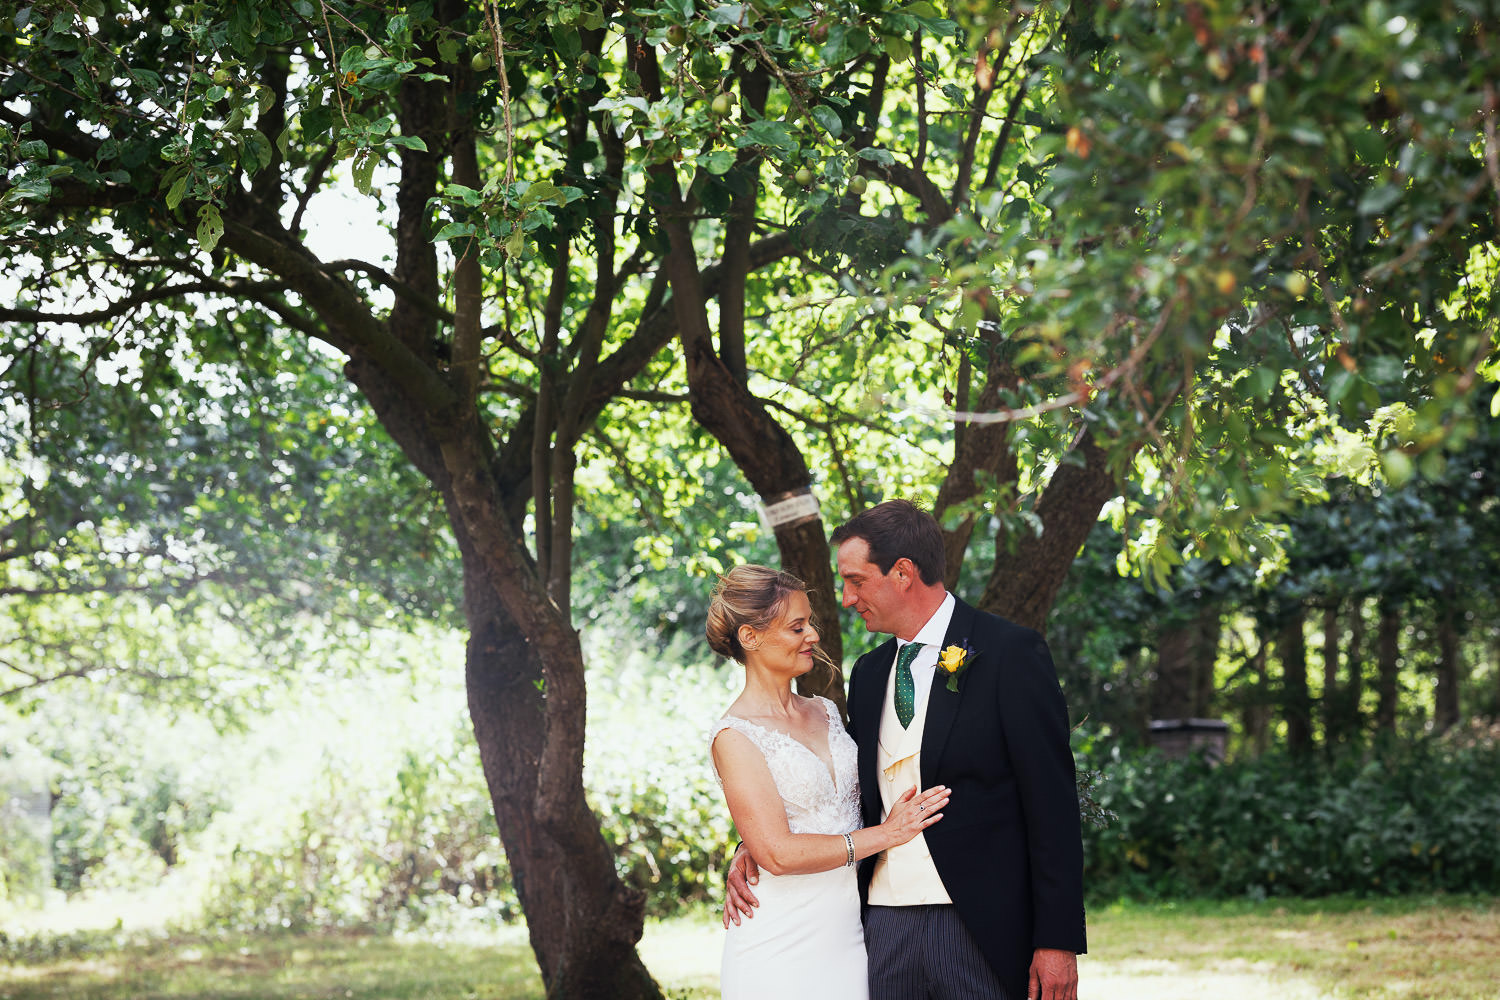 Bride and groom together under a tree in a Norfolk garden.